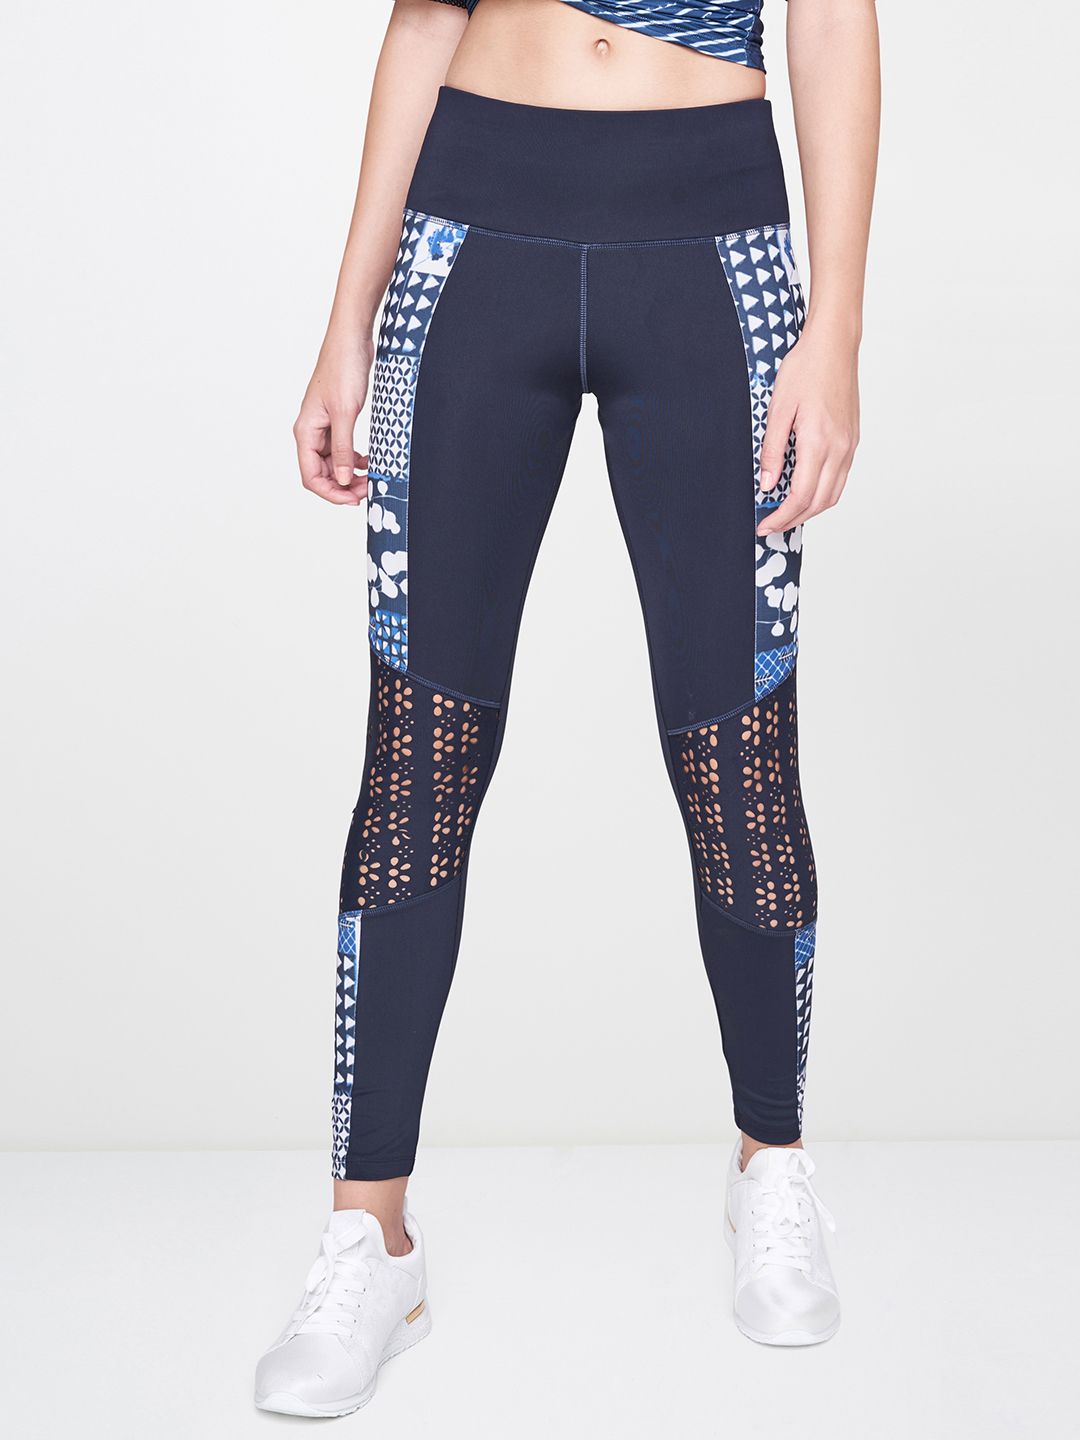 AND Women Navy Blue & White Printed Activewear Tights Price in India